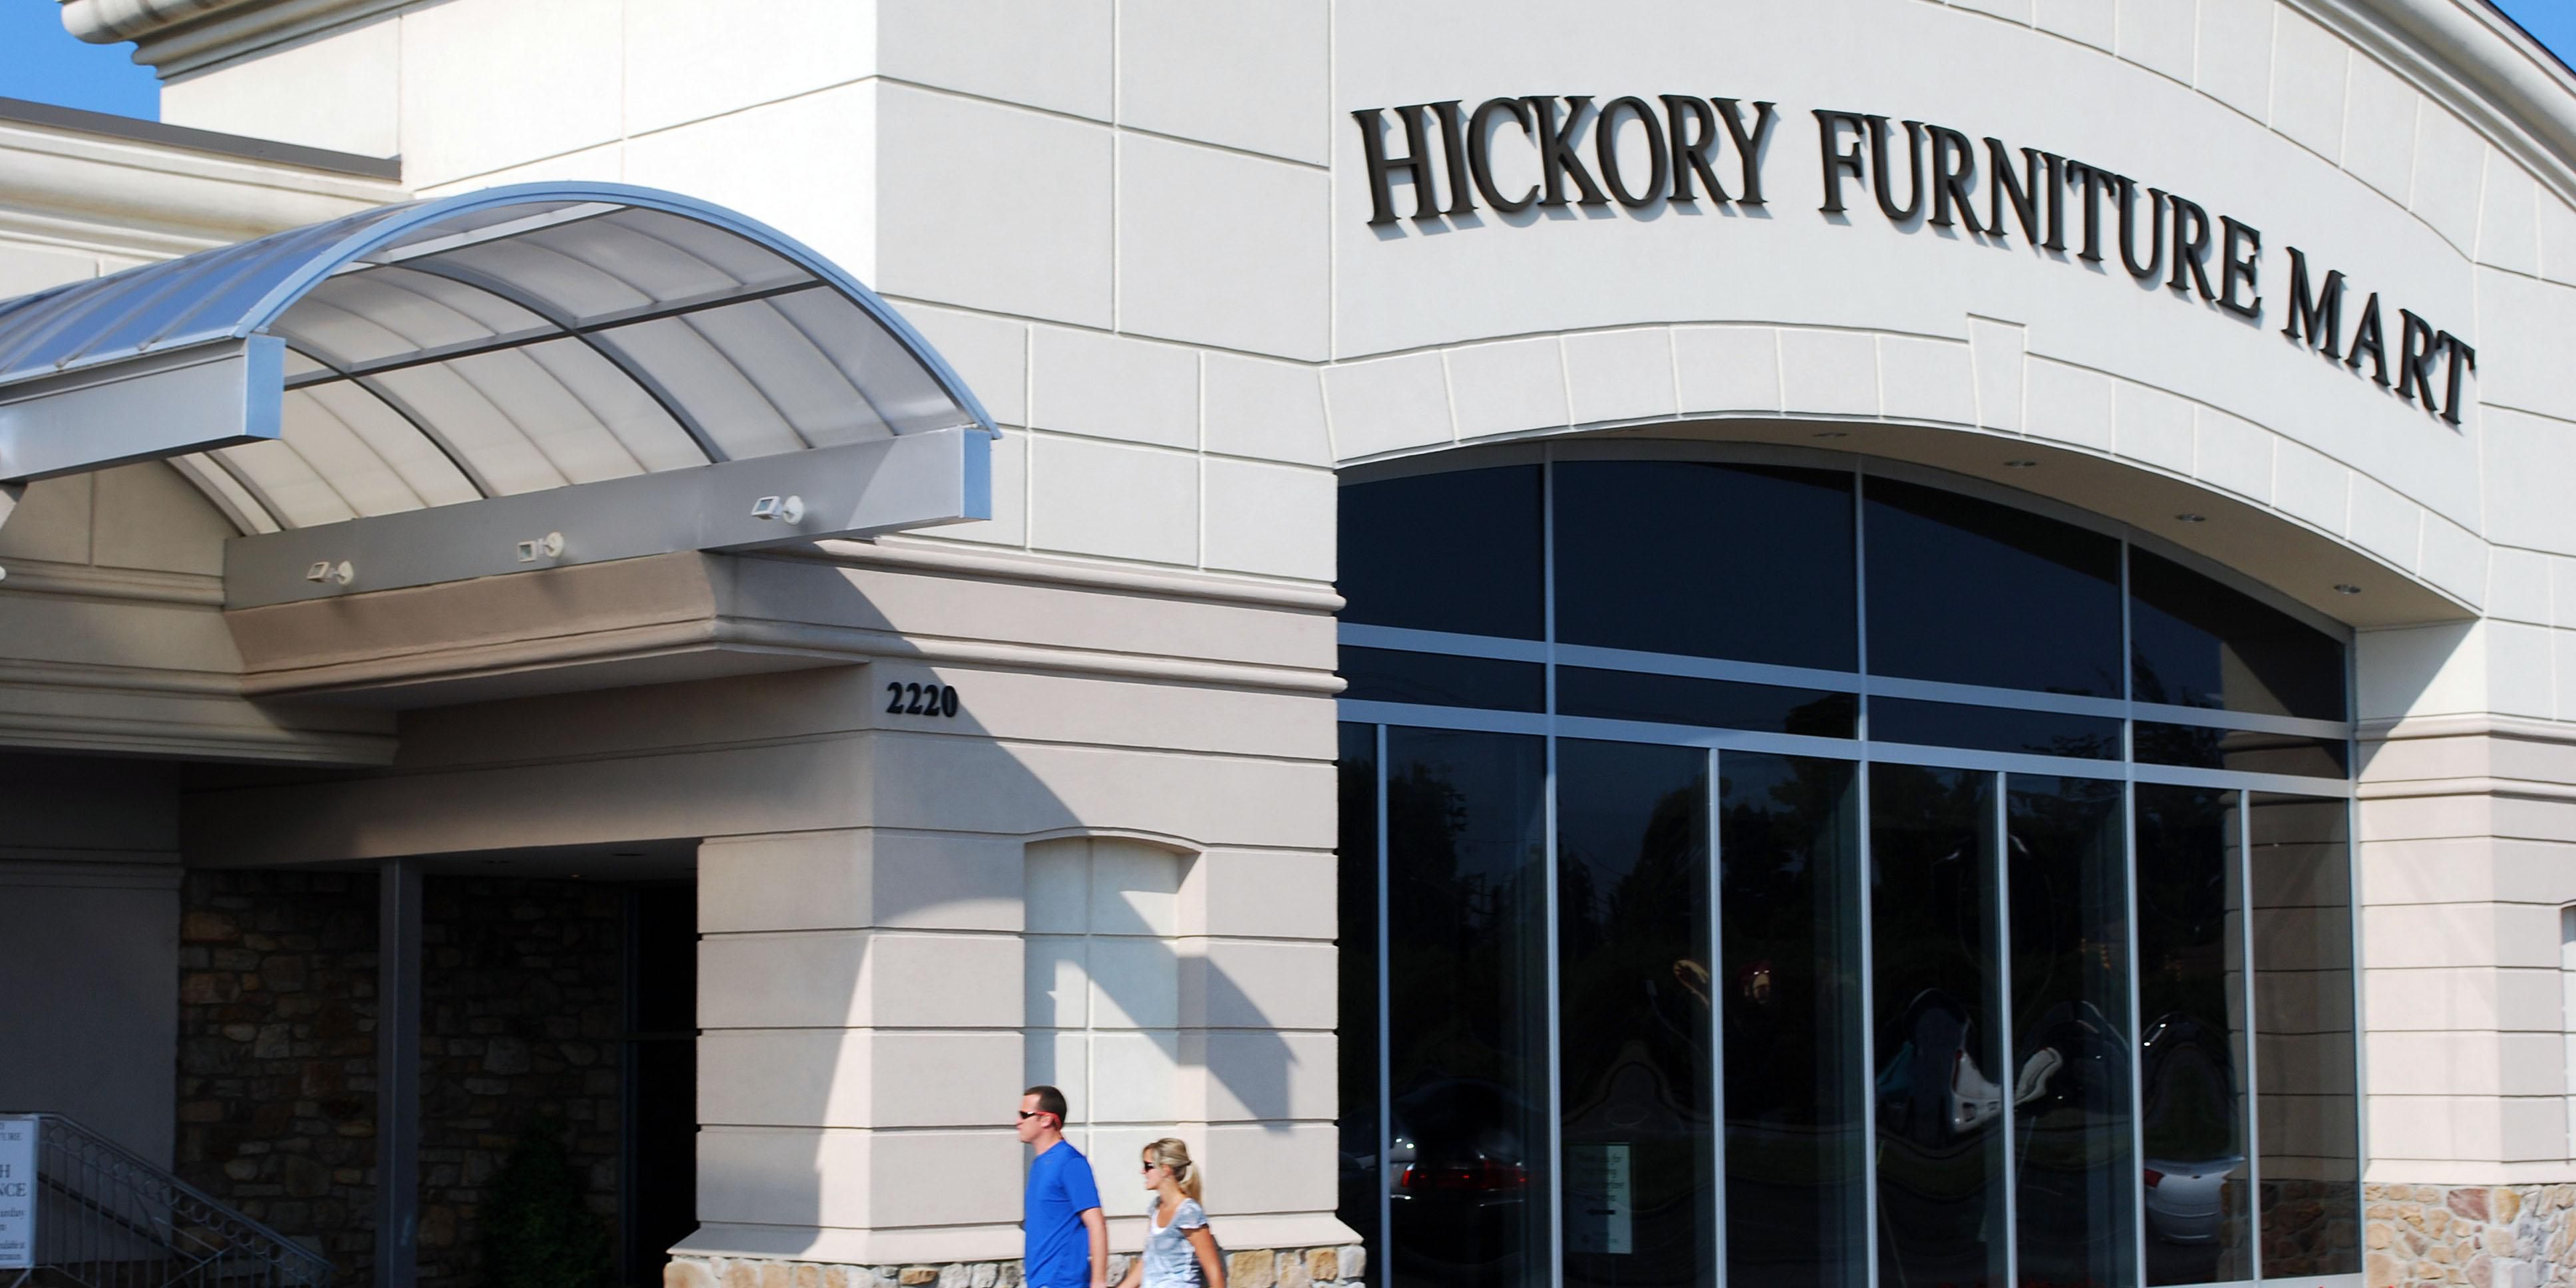 Our hotel is right next door to the Hickory Furniture Mart.  Our visitors travel from all over the world to Hickory in search of exceptional craftsmanship from some of the most popular furniture designers and manufacturers within the industry, many who proudly call the Catawba Valley region their home.